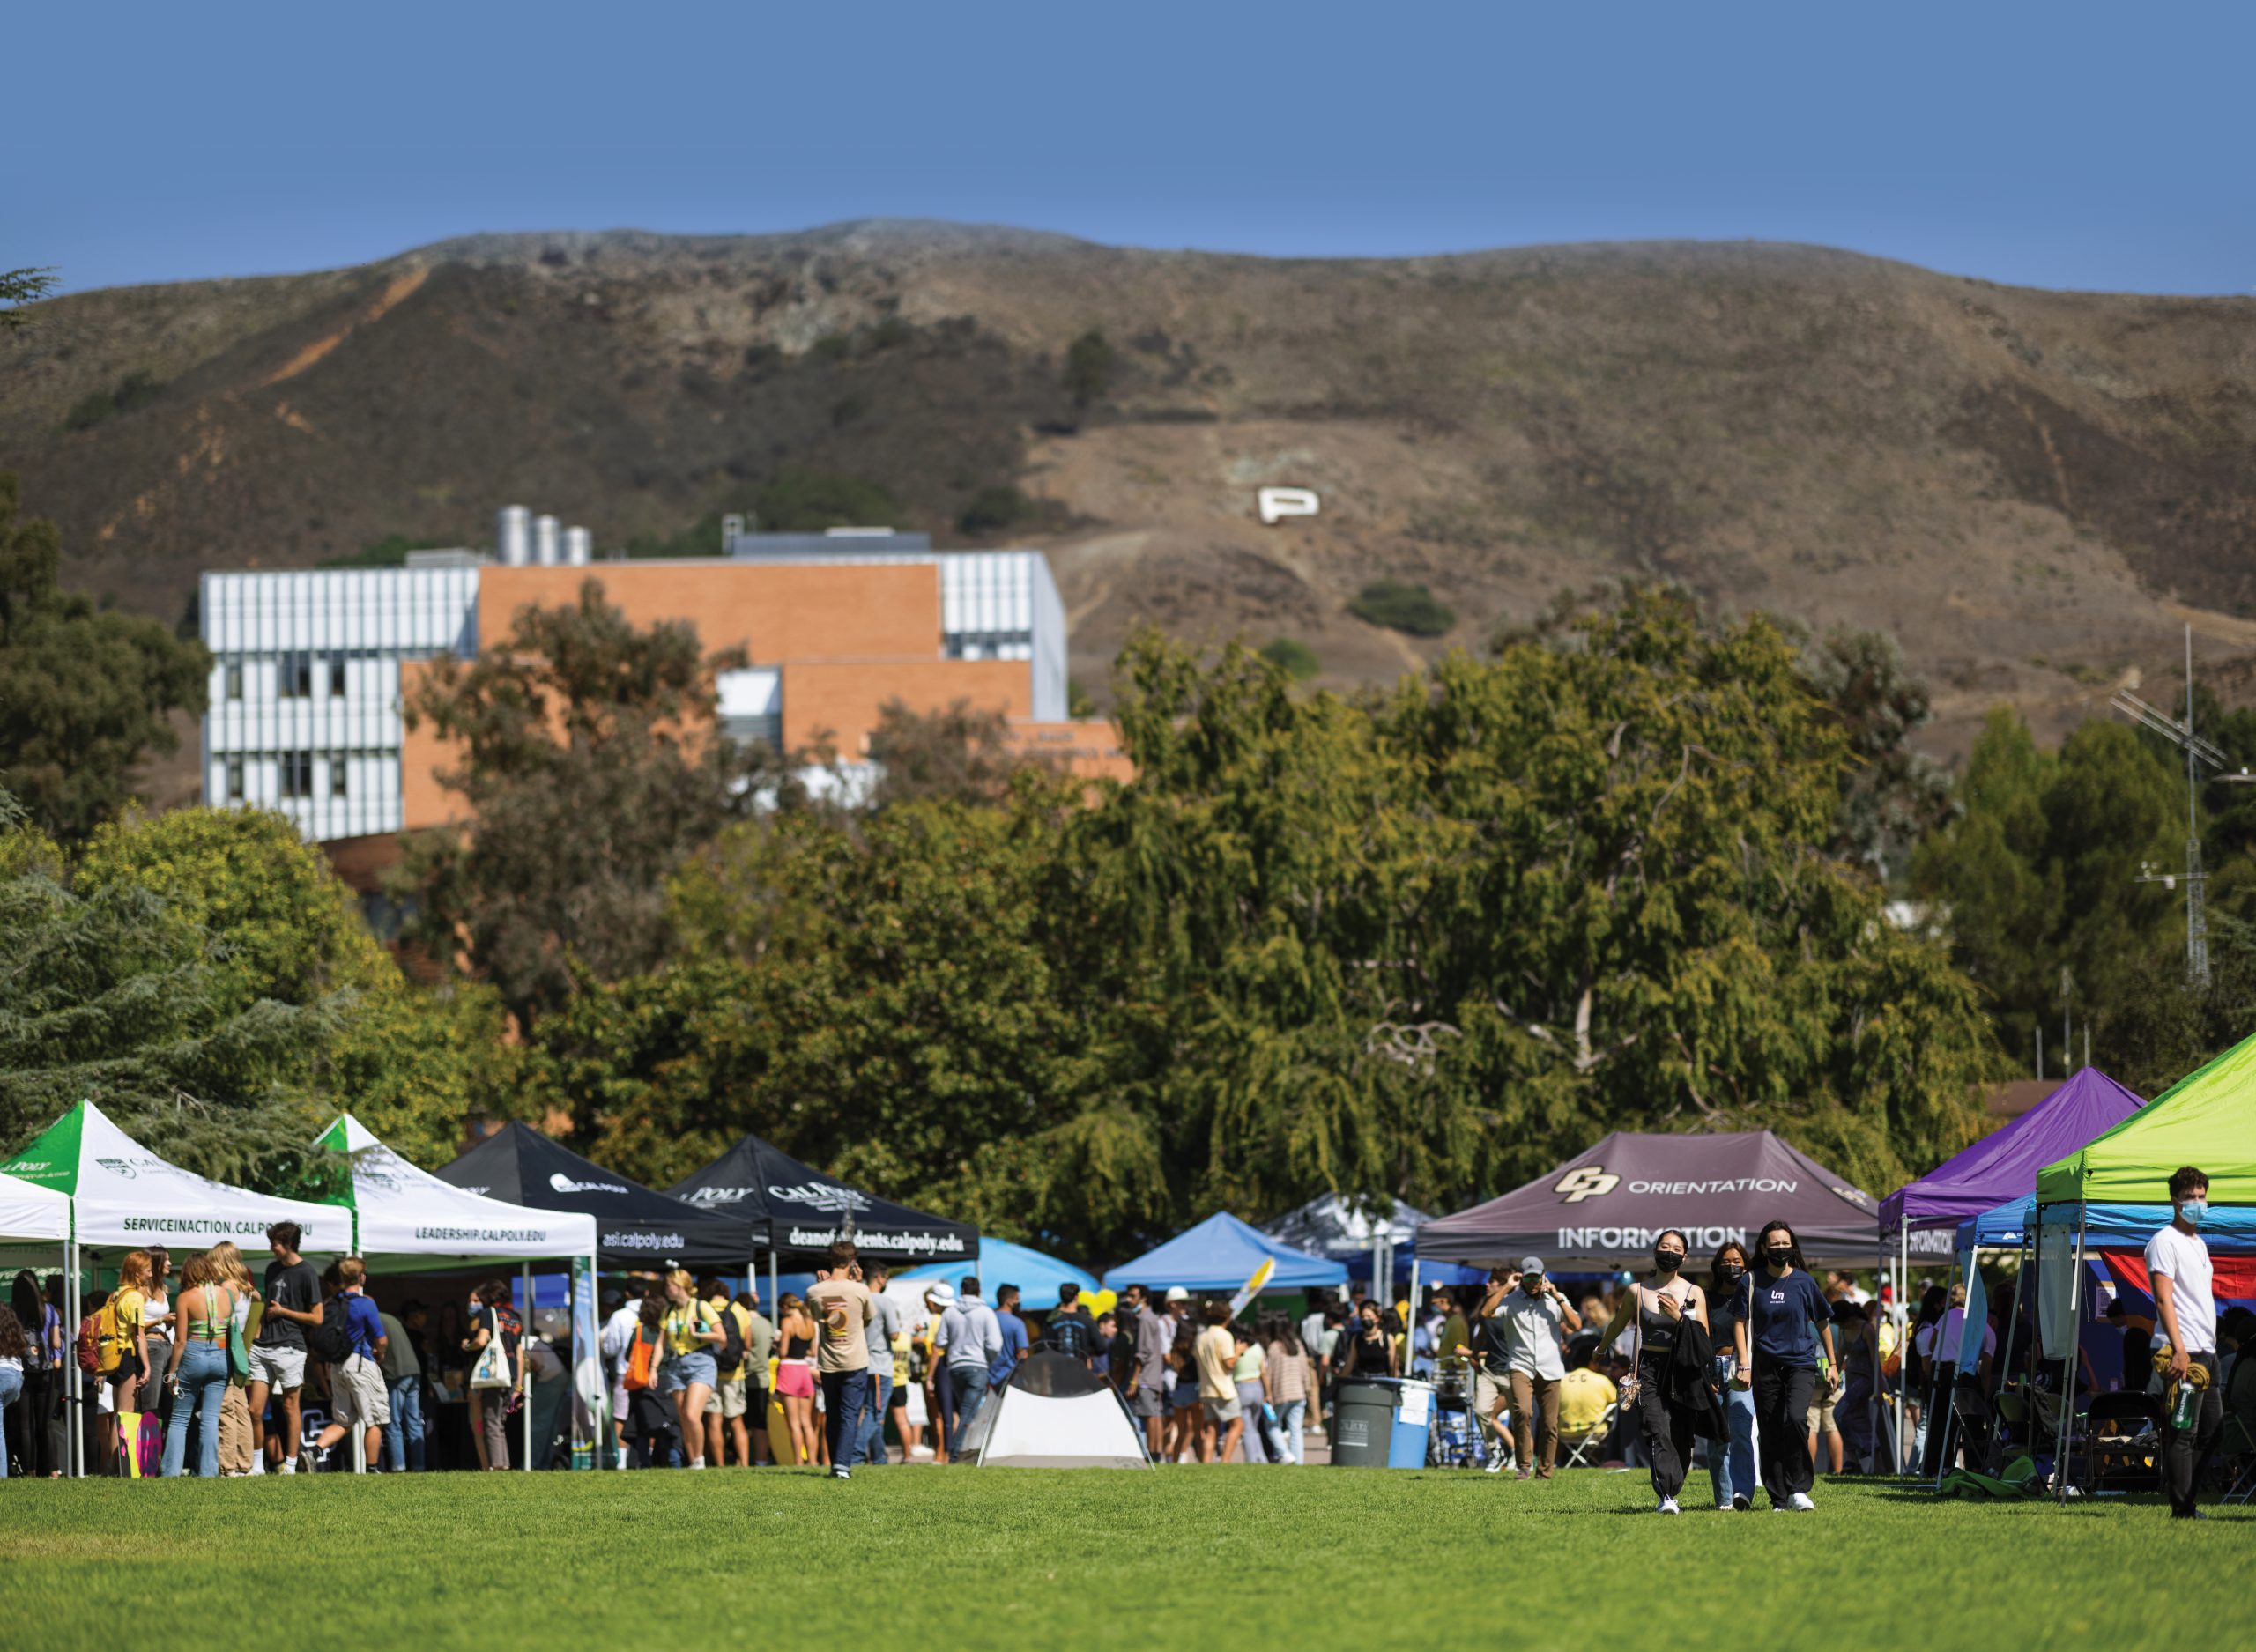 Crowds of students browse tents and booths around a green lawn, with a large metal and brick building and Cal Poly's hillside P visible in the background